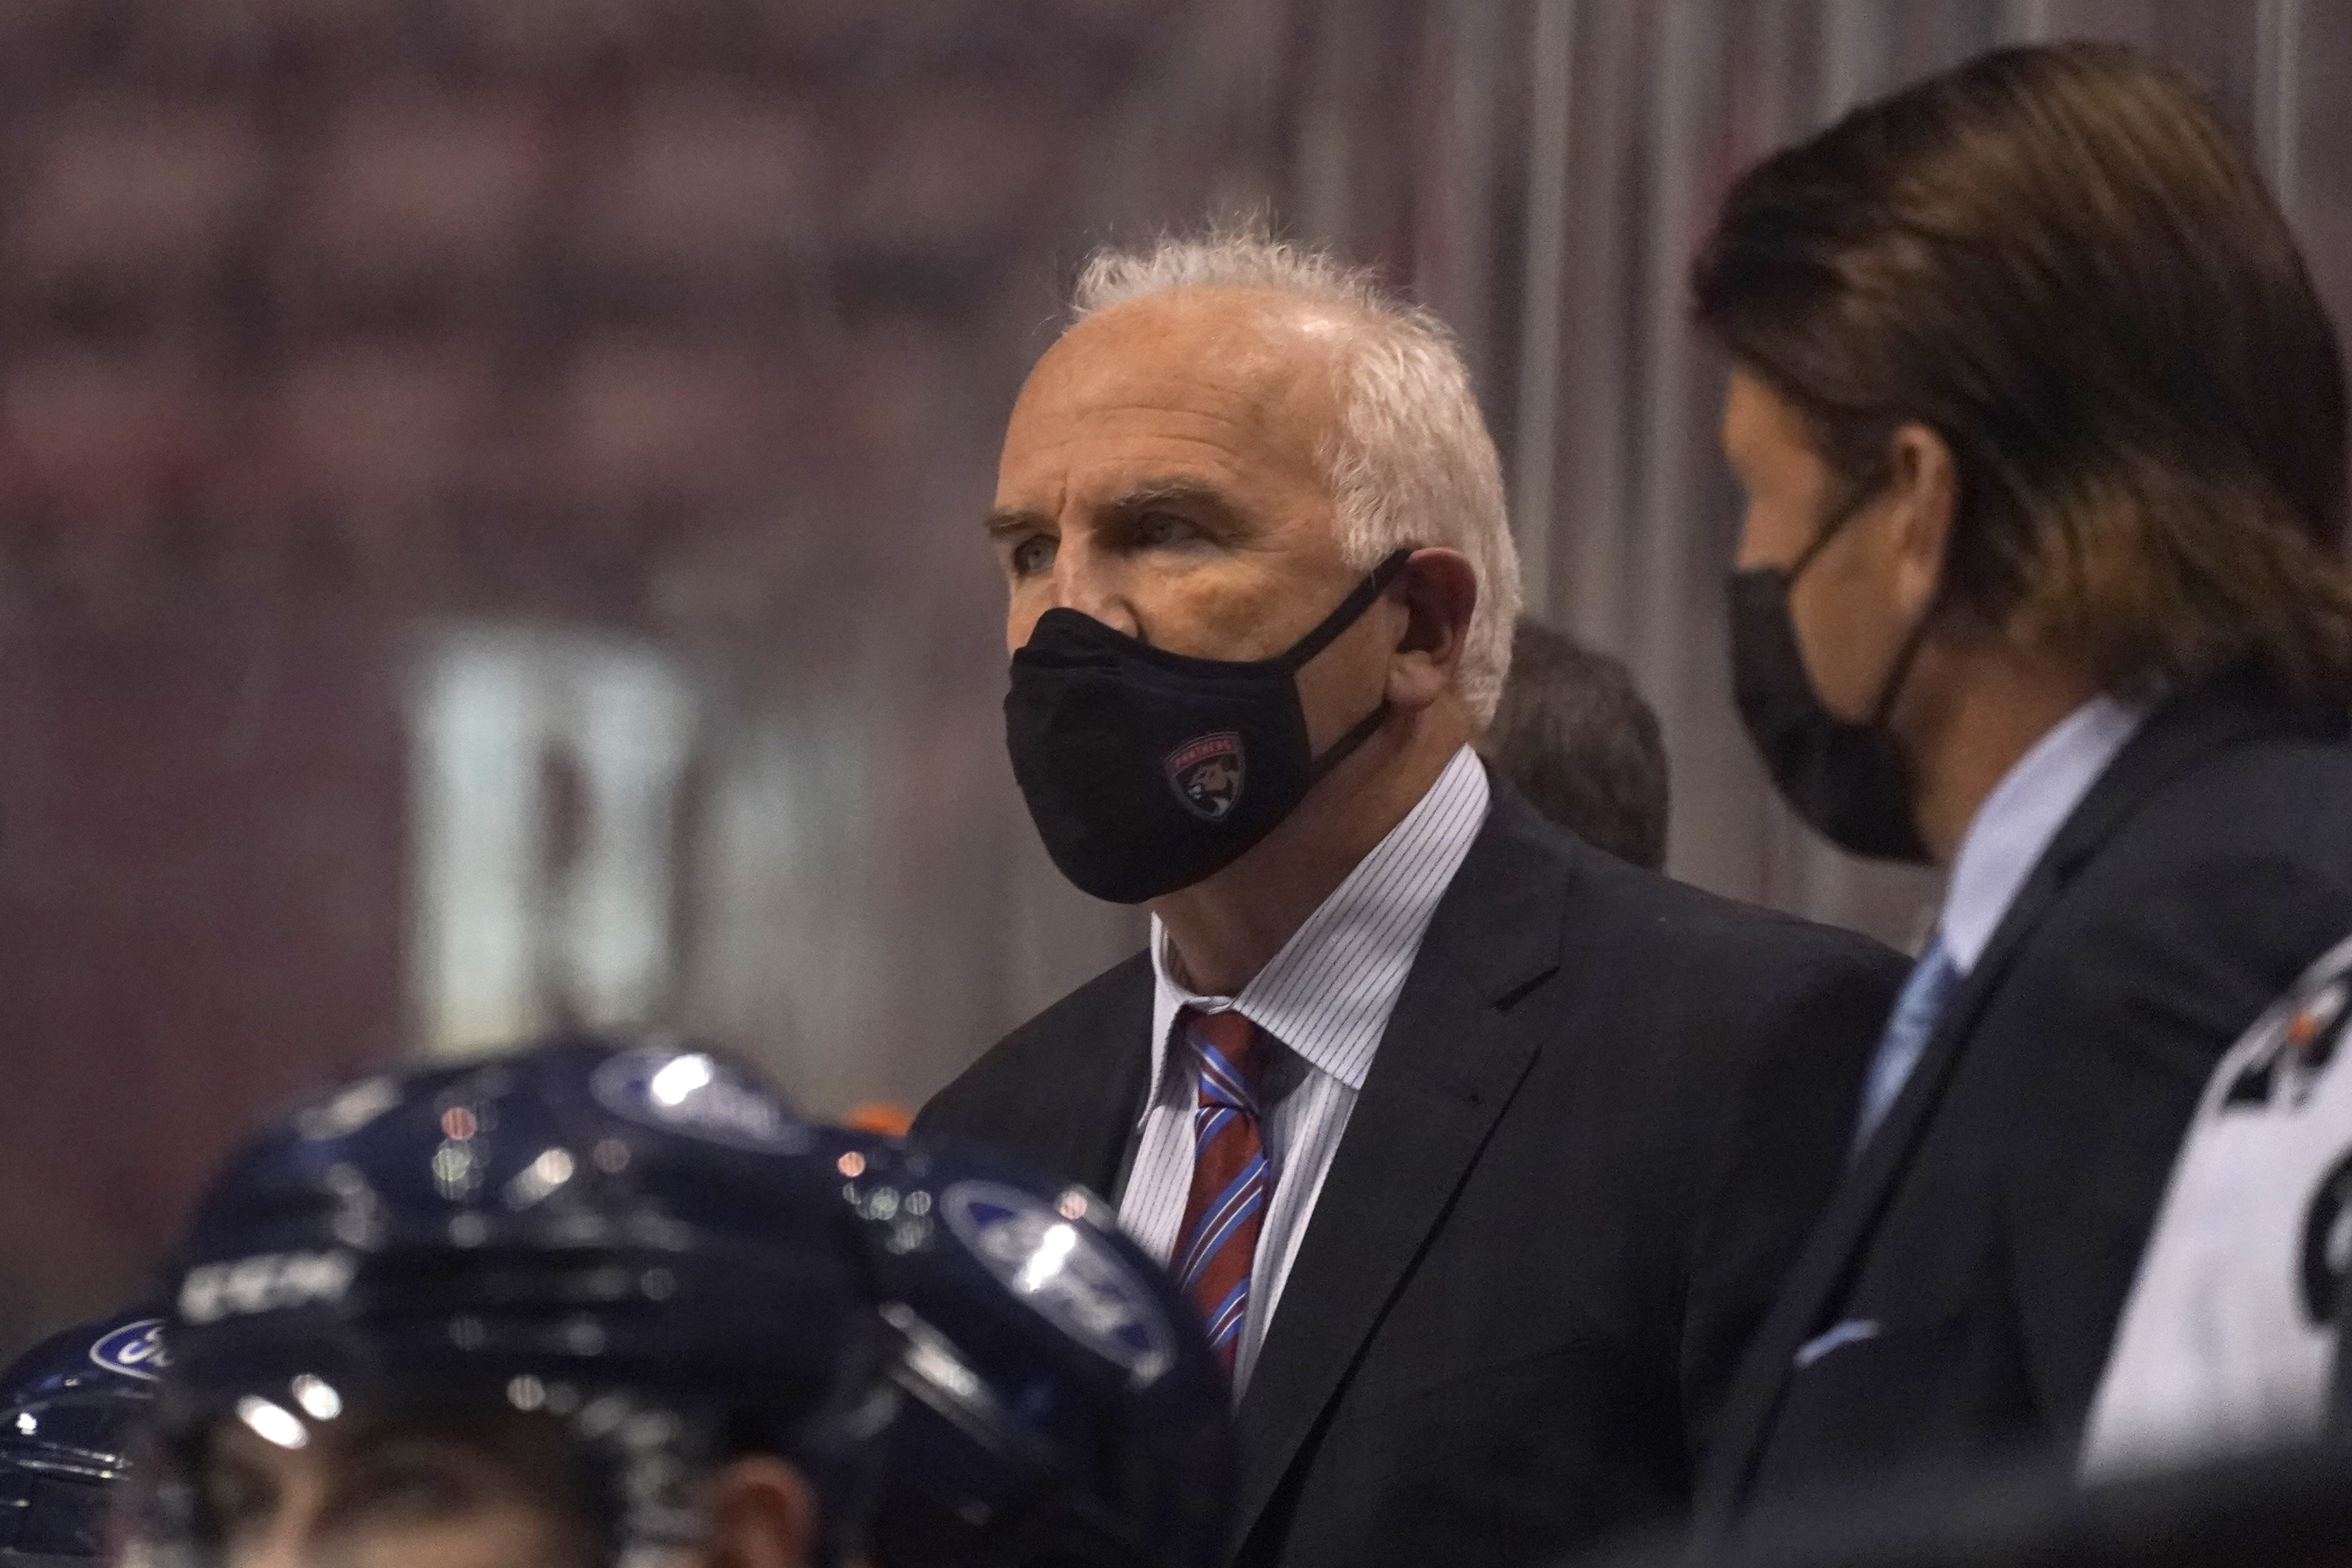 From Joel Quenneville to Stan Bowman, the lack of accountability within the Blackhawks organization was shocking.